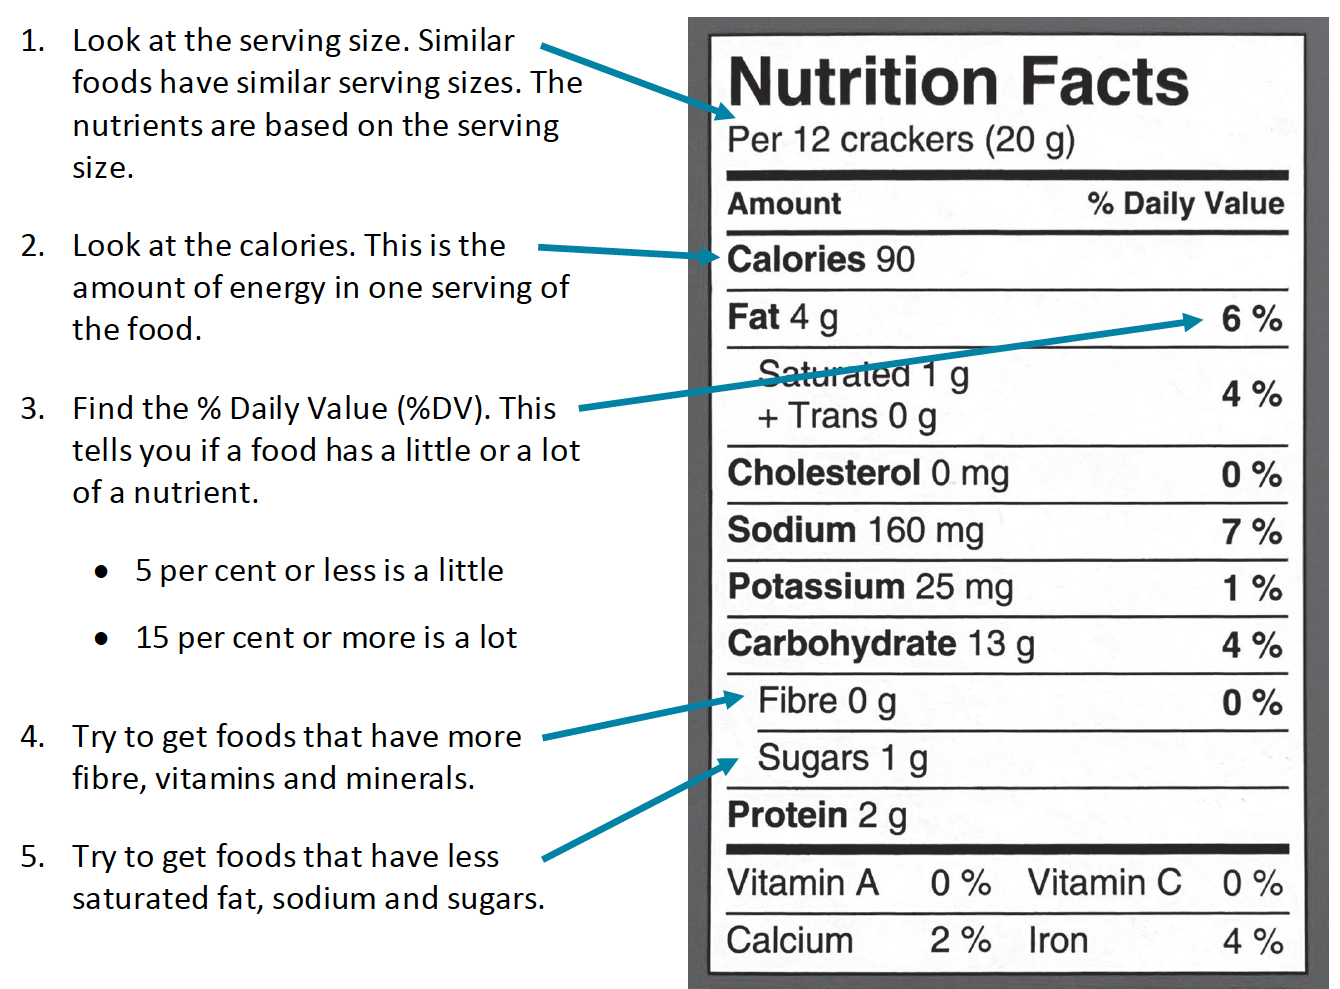 Look at the serving size. Similar foods have similar serving sizes. The nutrients are based on the serving size. Look at the calories. This is the amount of energy in one serving of the food. Find the % Daily Value (%DV). This tells you if a food has a little or a lot of a nutrient. 5 per cent or less is a little 15 per cent or more is a lot Try to get foods that have more fibre, vitamins and minerals. Try to get foods that have less saturated fat, sodium and sugars.